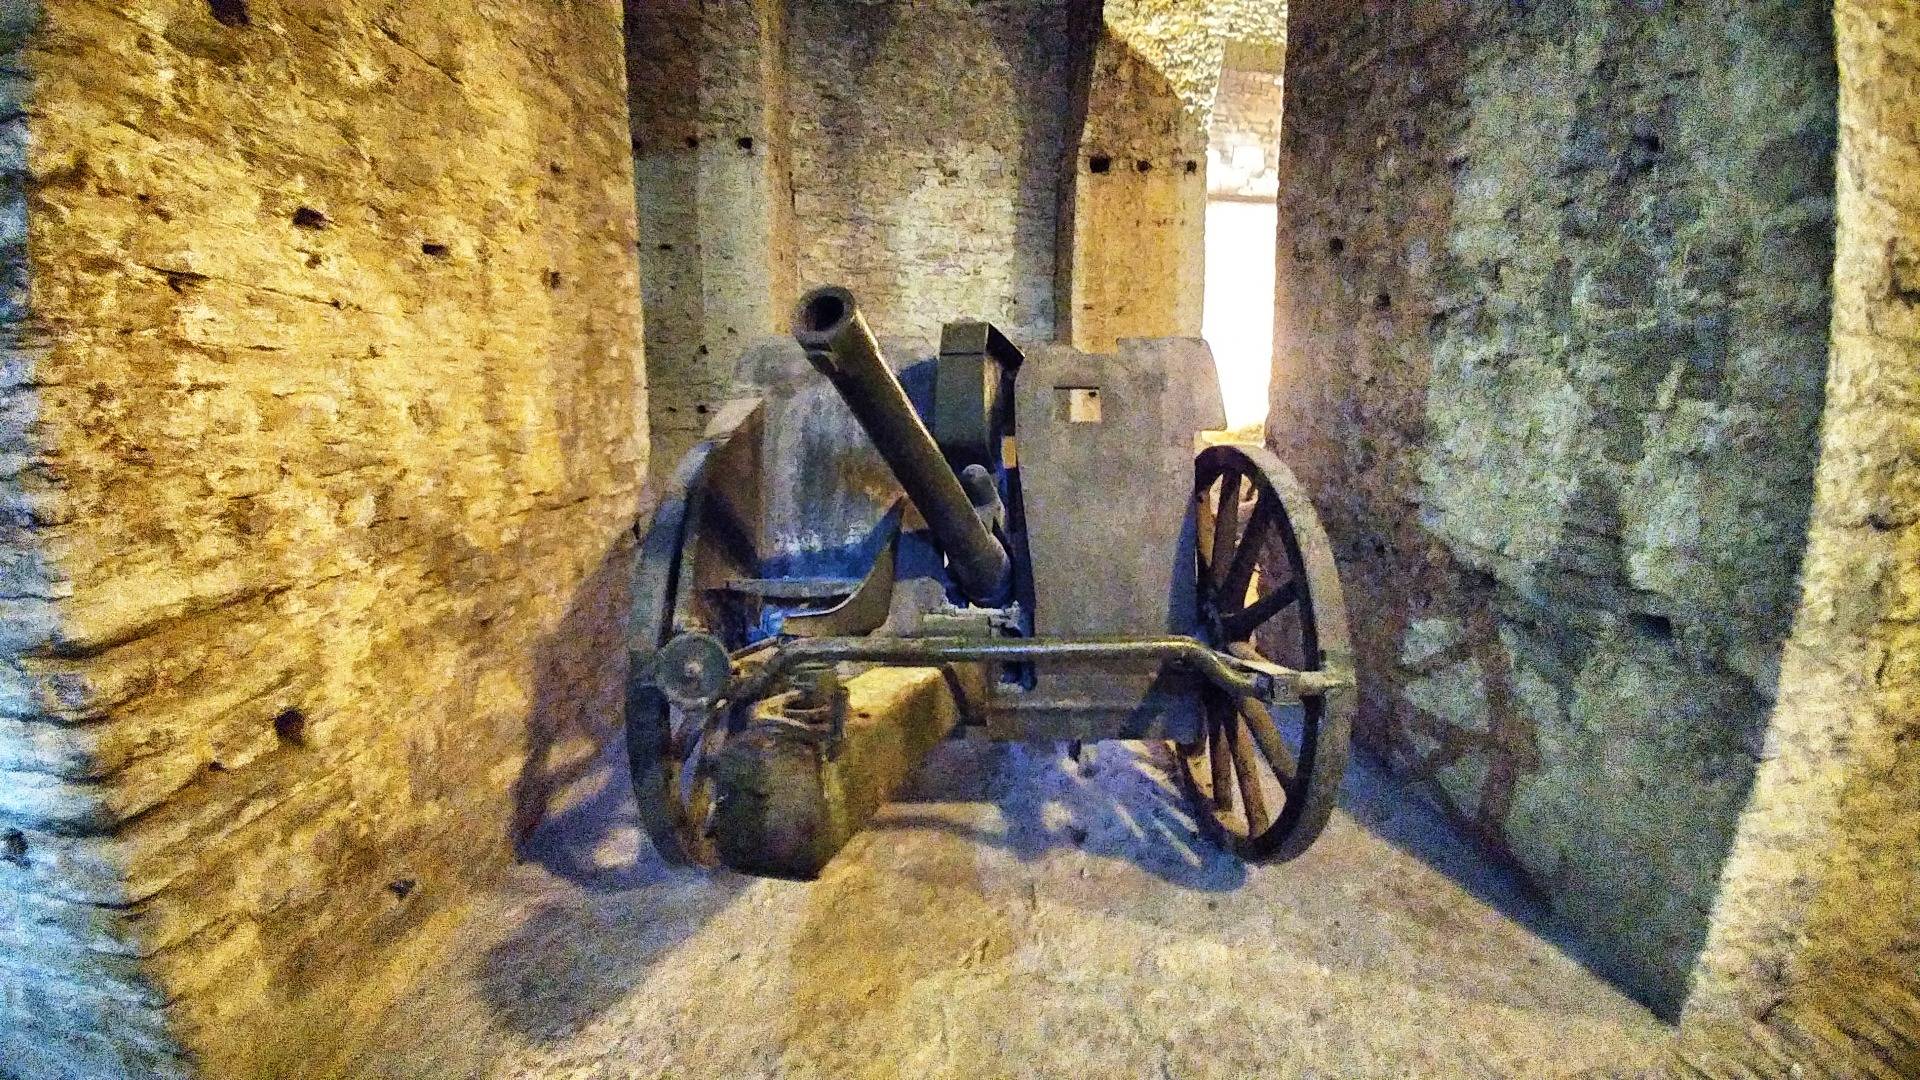 A cannon shown in the underground of the castle